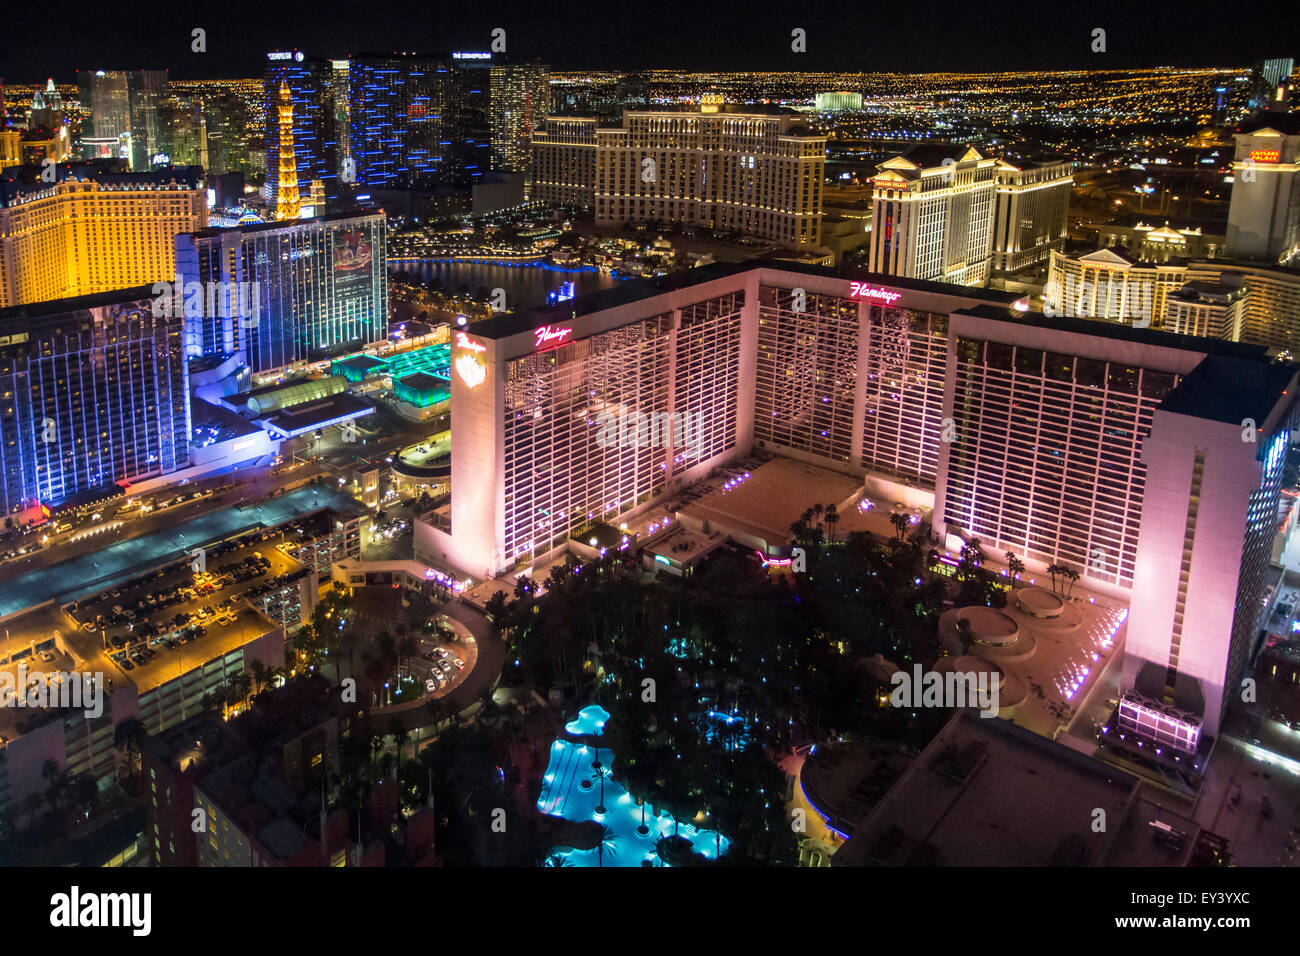 High angle view of Las Vegas at night, with the illuminated Flamingo hotel and casino in the foreground. Stock Photo